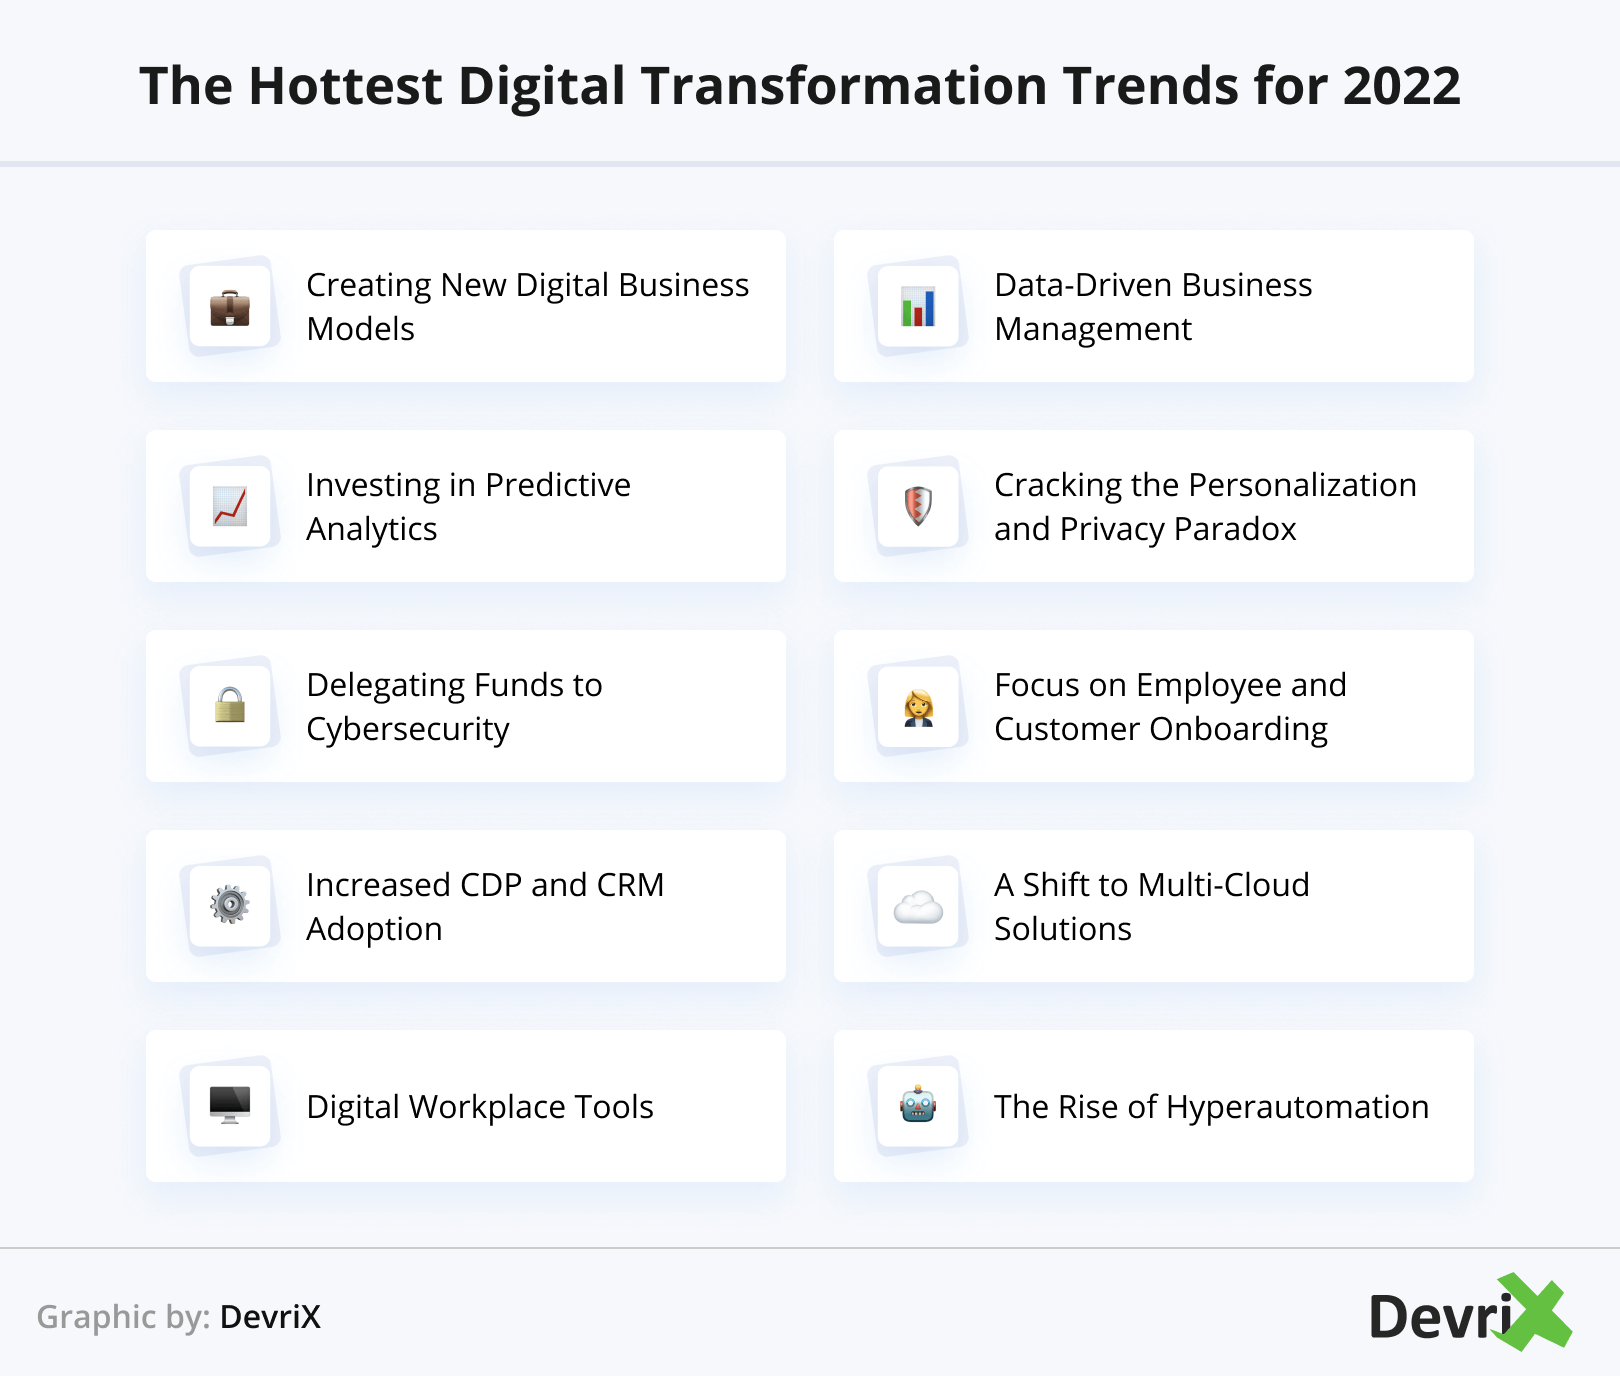 The Hottest Digital Transformation Trends for 2022